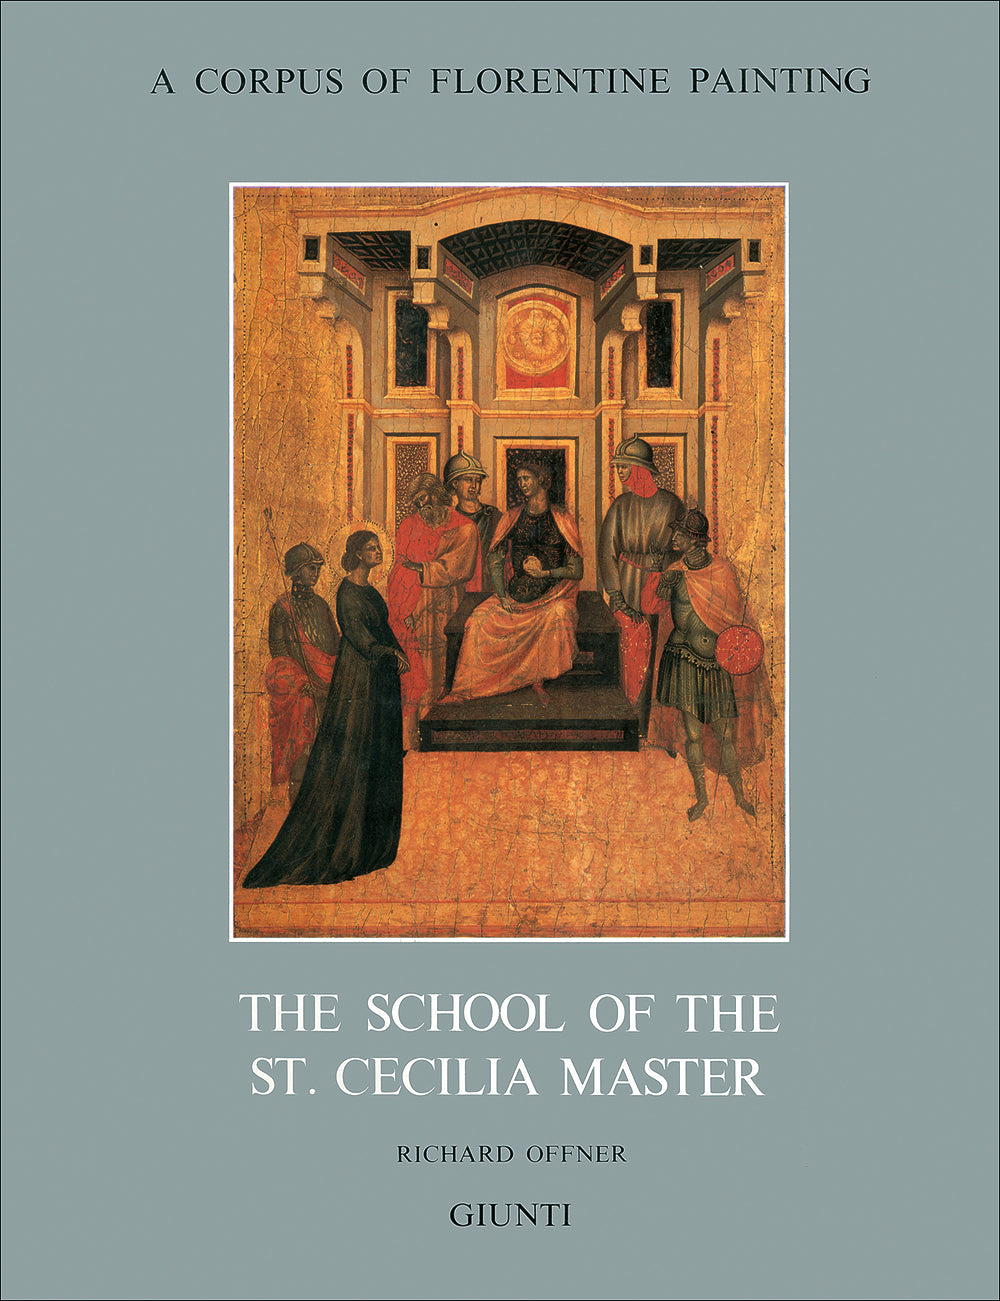 The school of St. Cecilia Master (in inglese)::Section III, Volume I